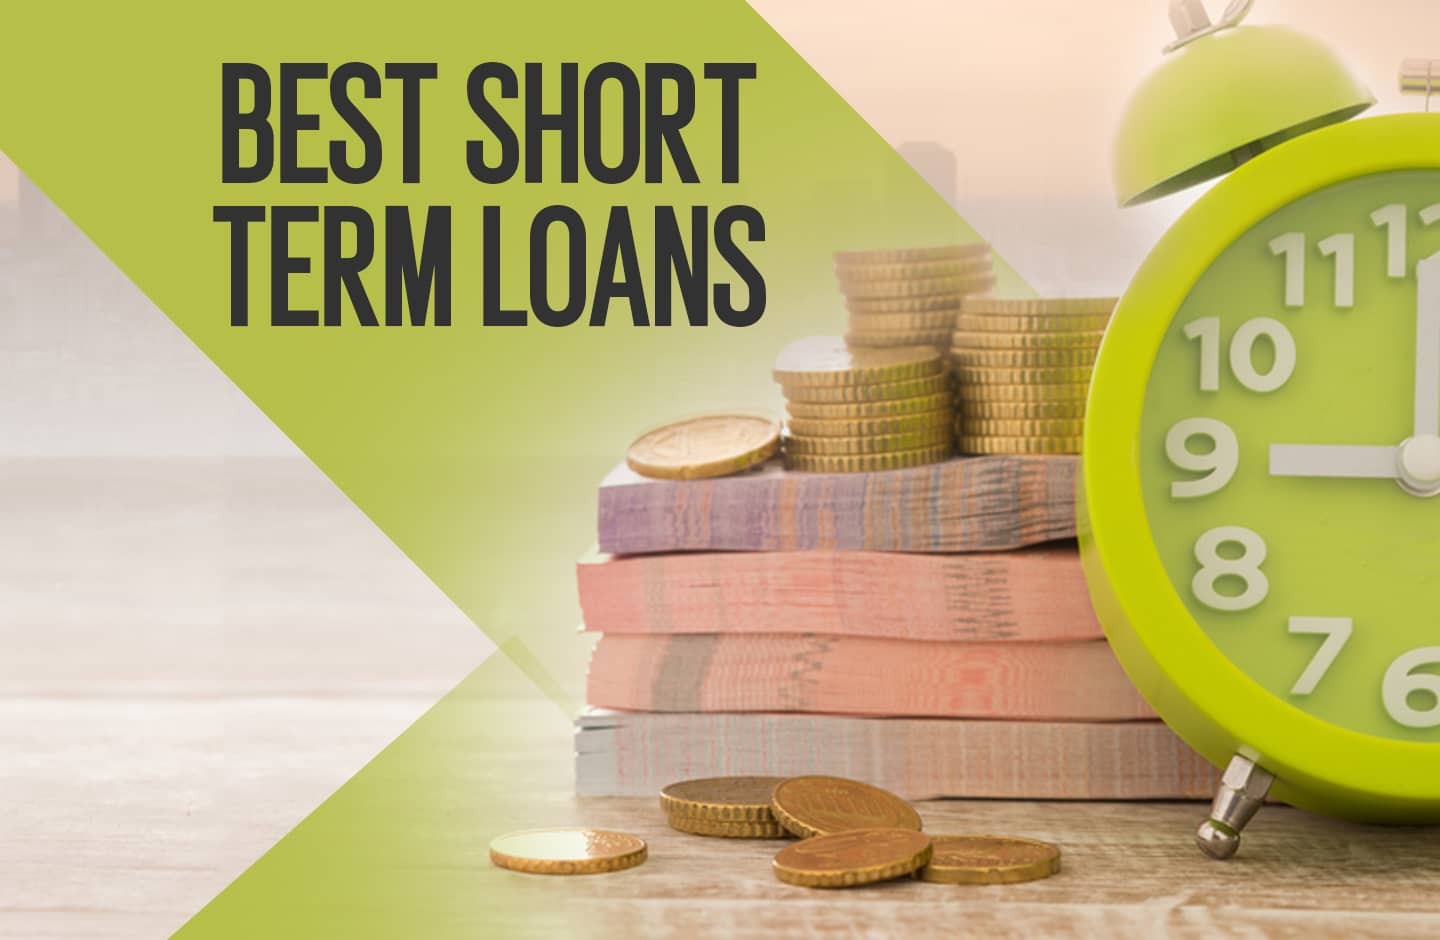 Here Are 7 Ways To Better Increasing Payday Loan Demand